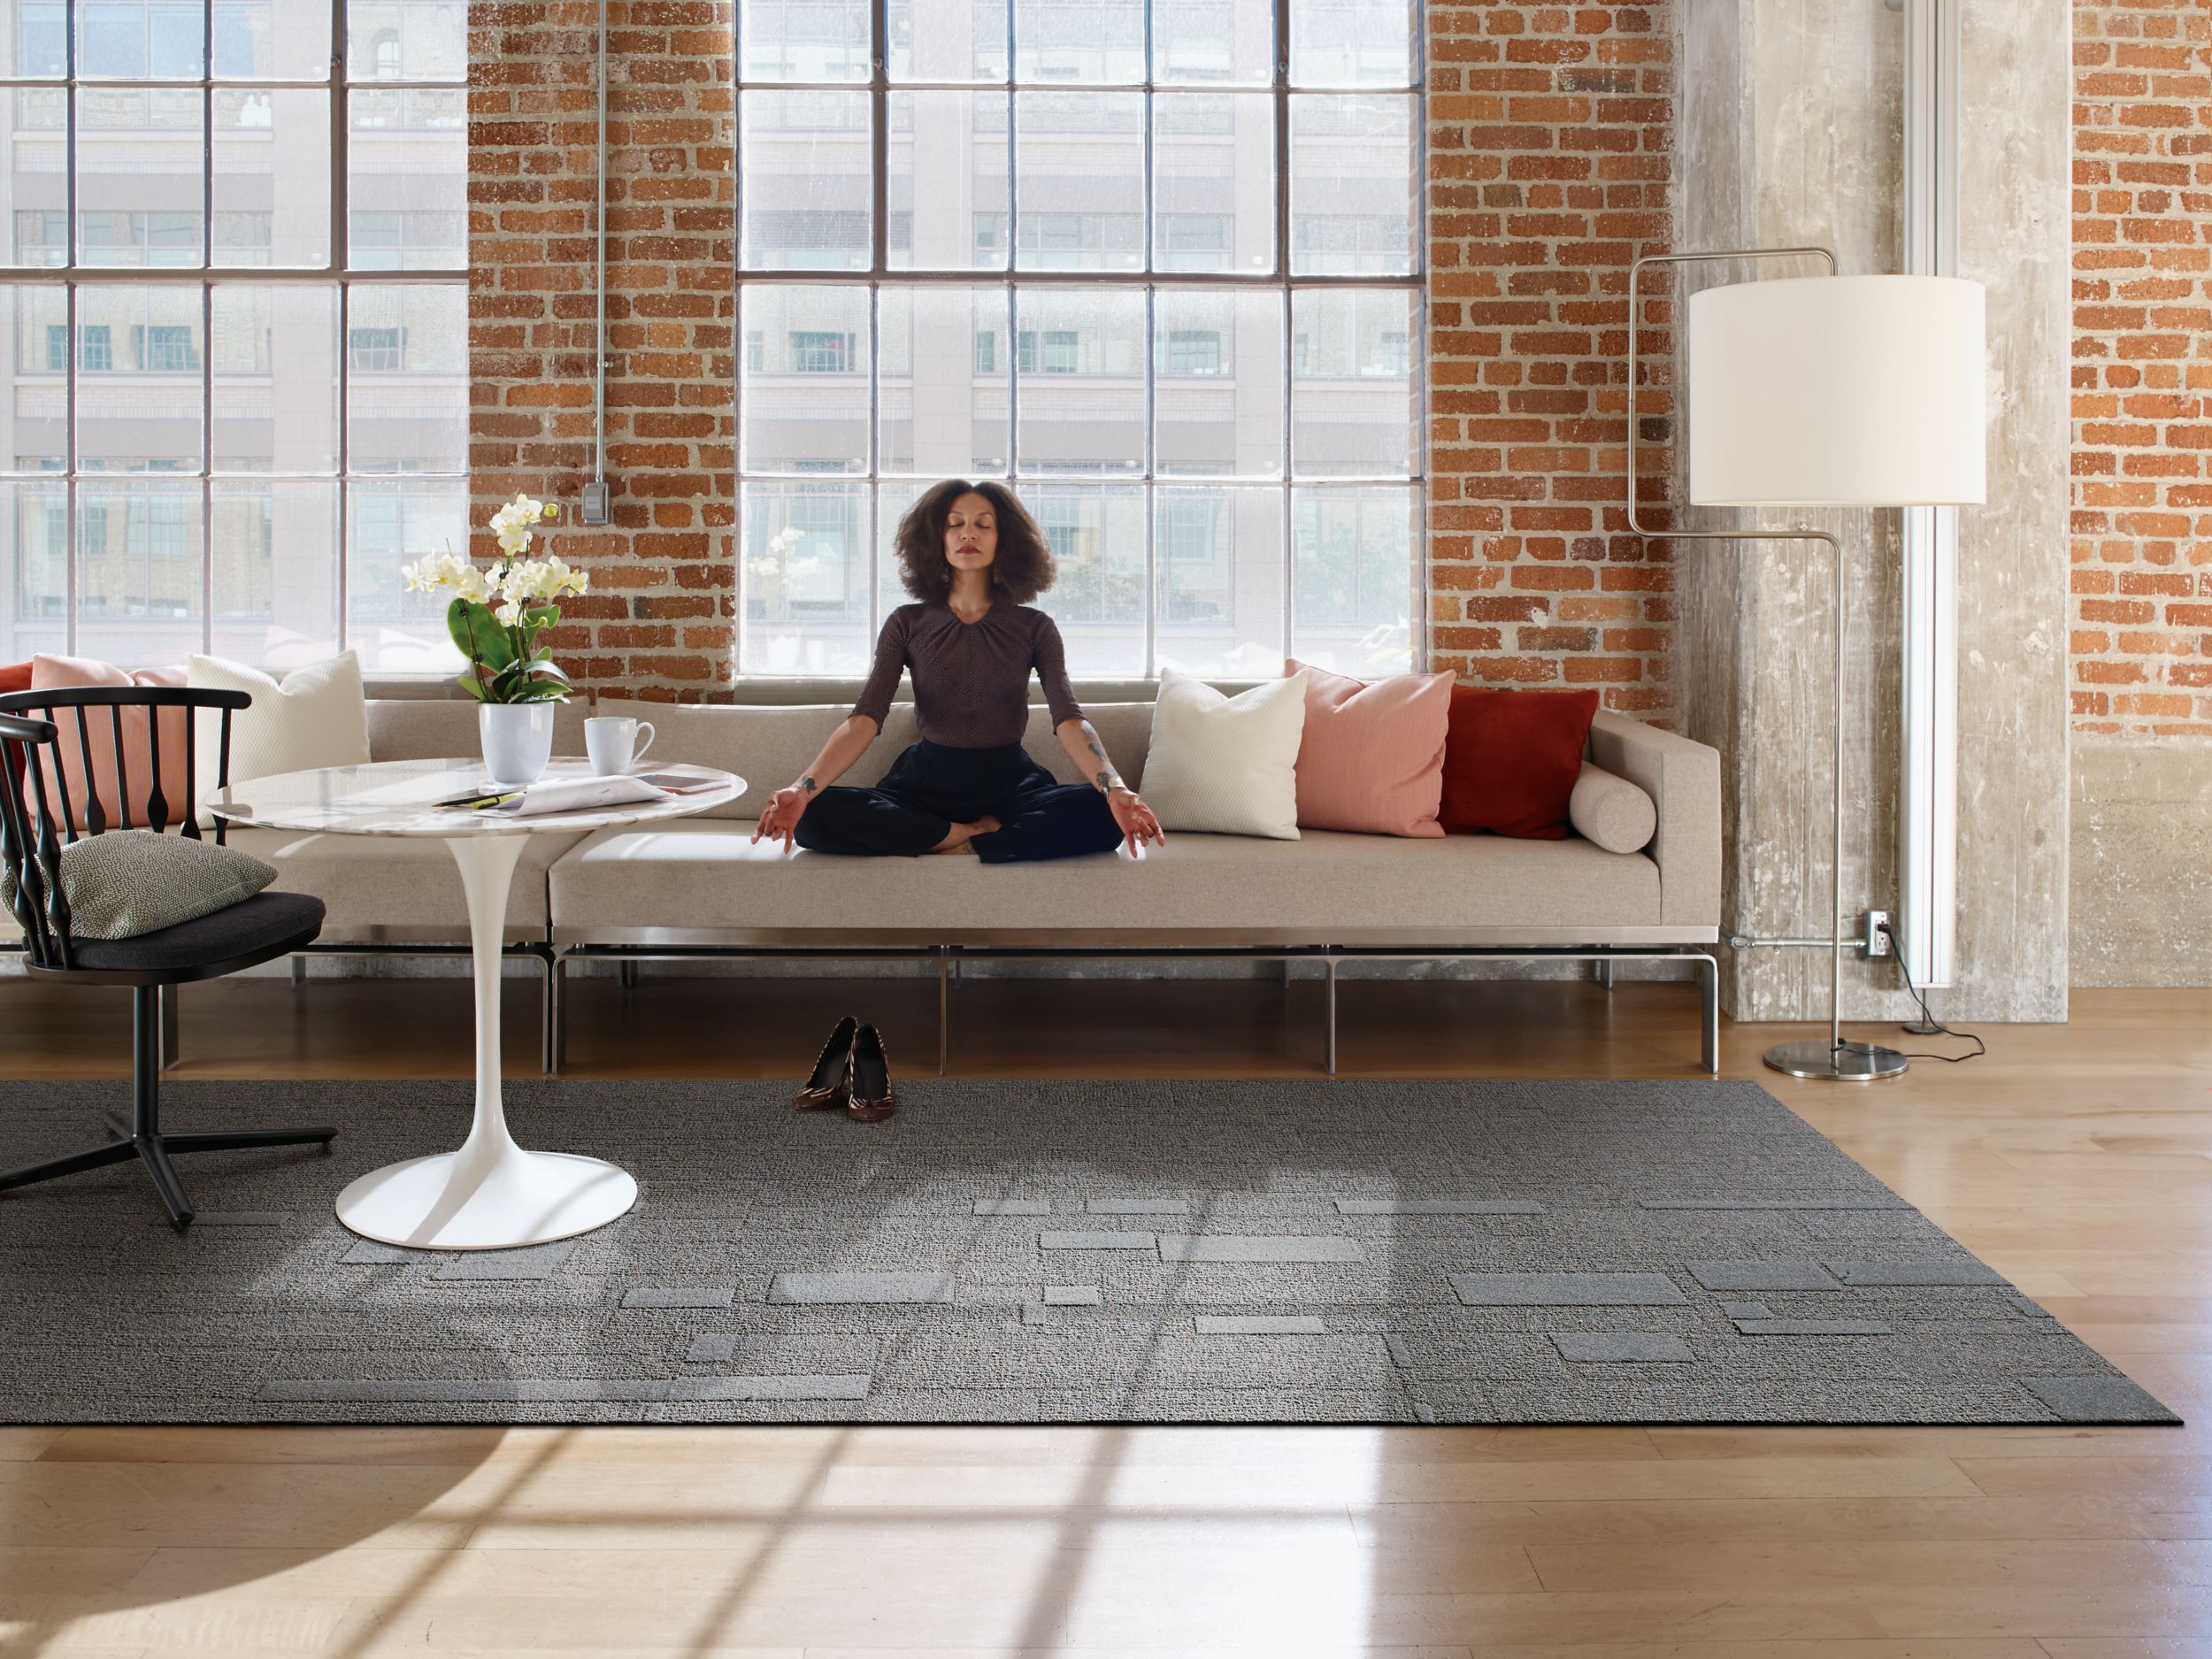 Interface EM551 plank carpet tile with woman meditating on couch imagen número 10